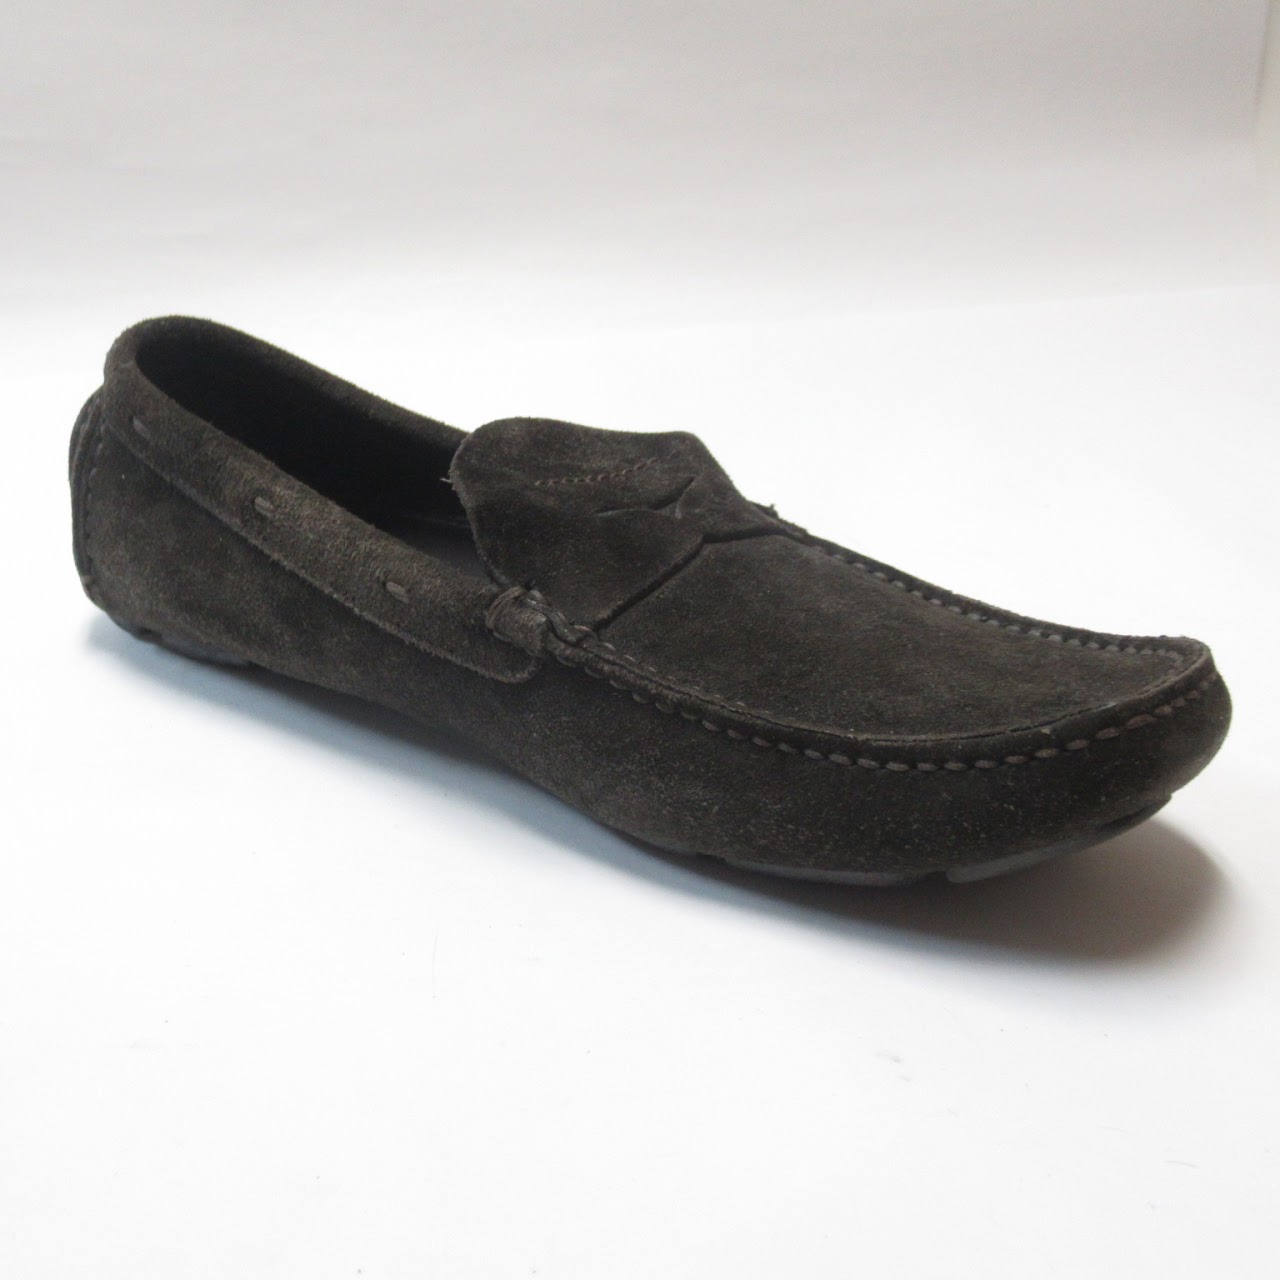 Prada Brown Suede Loafers